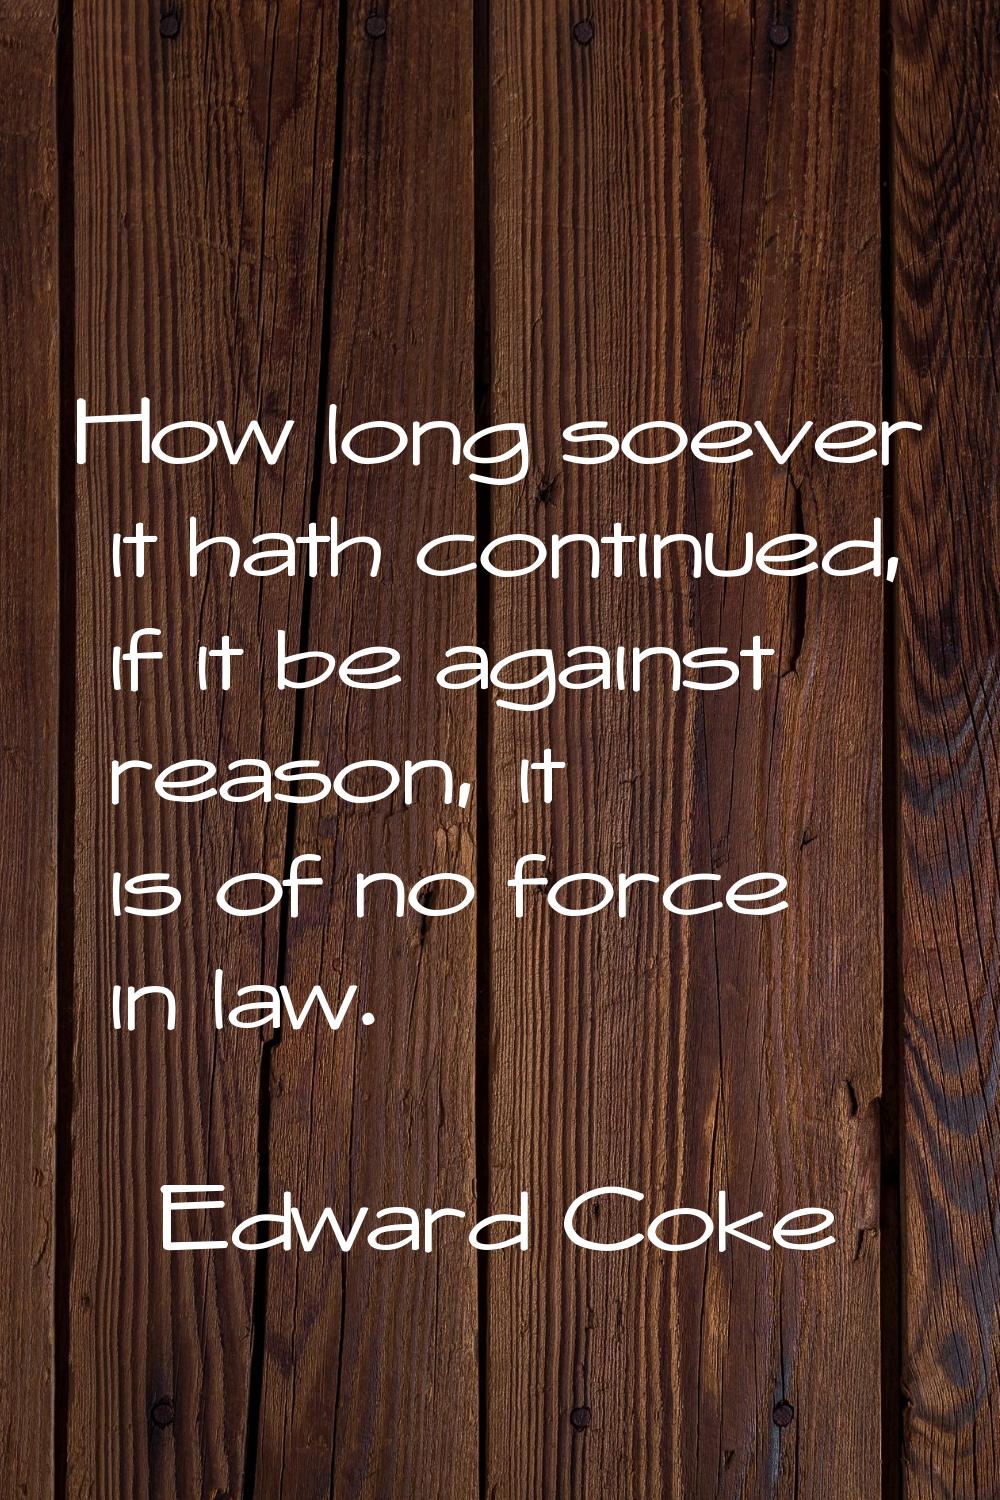 How long soever it hath continued, if it be against reason, it is of no force in law.